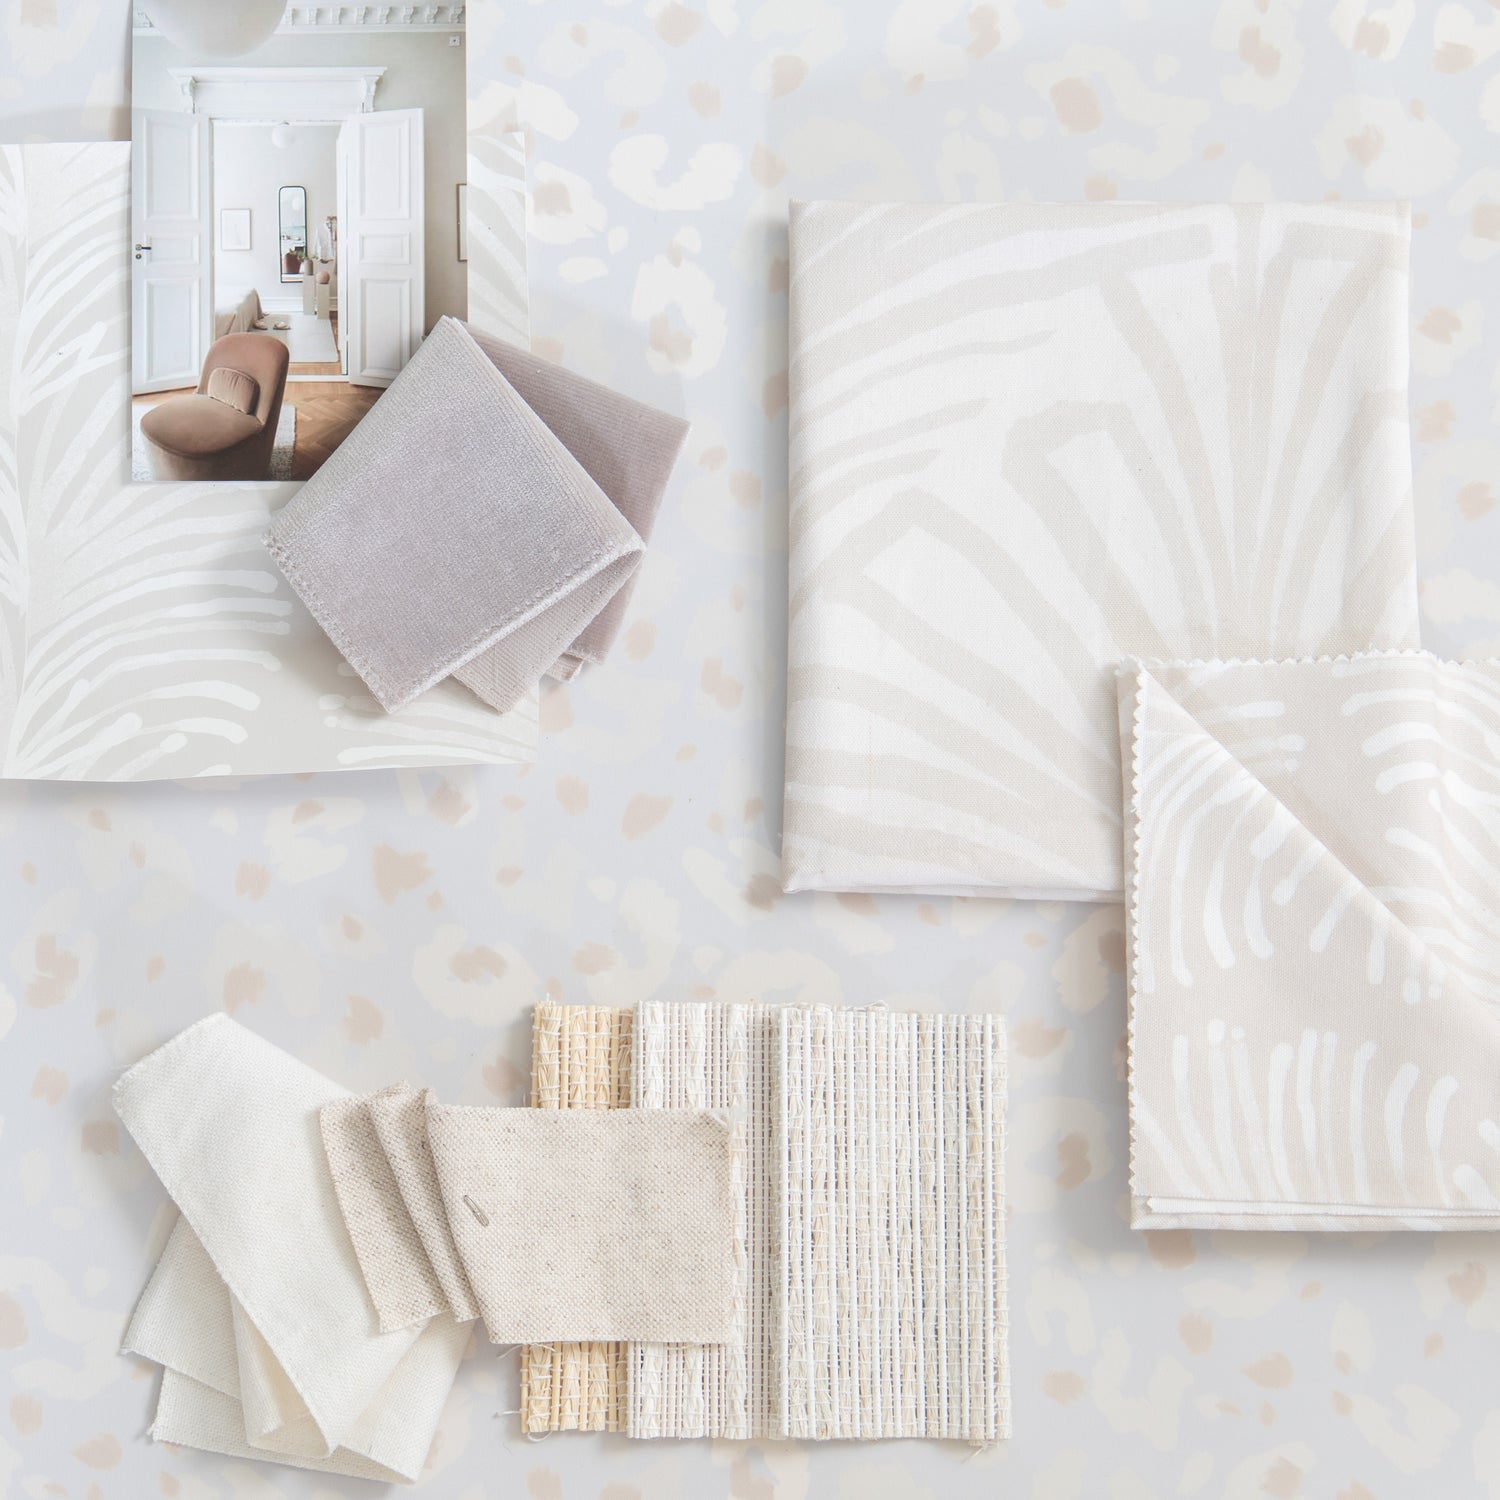 Interior design moodboard and fabric inspirations with Beige Botanical Stripe Printed Swatch, Grey Velvet Swatch and beige palm printed swatch